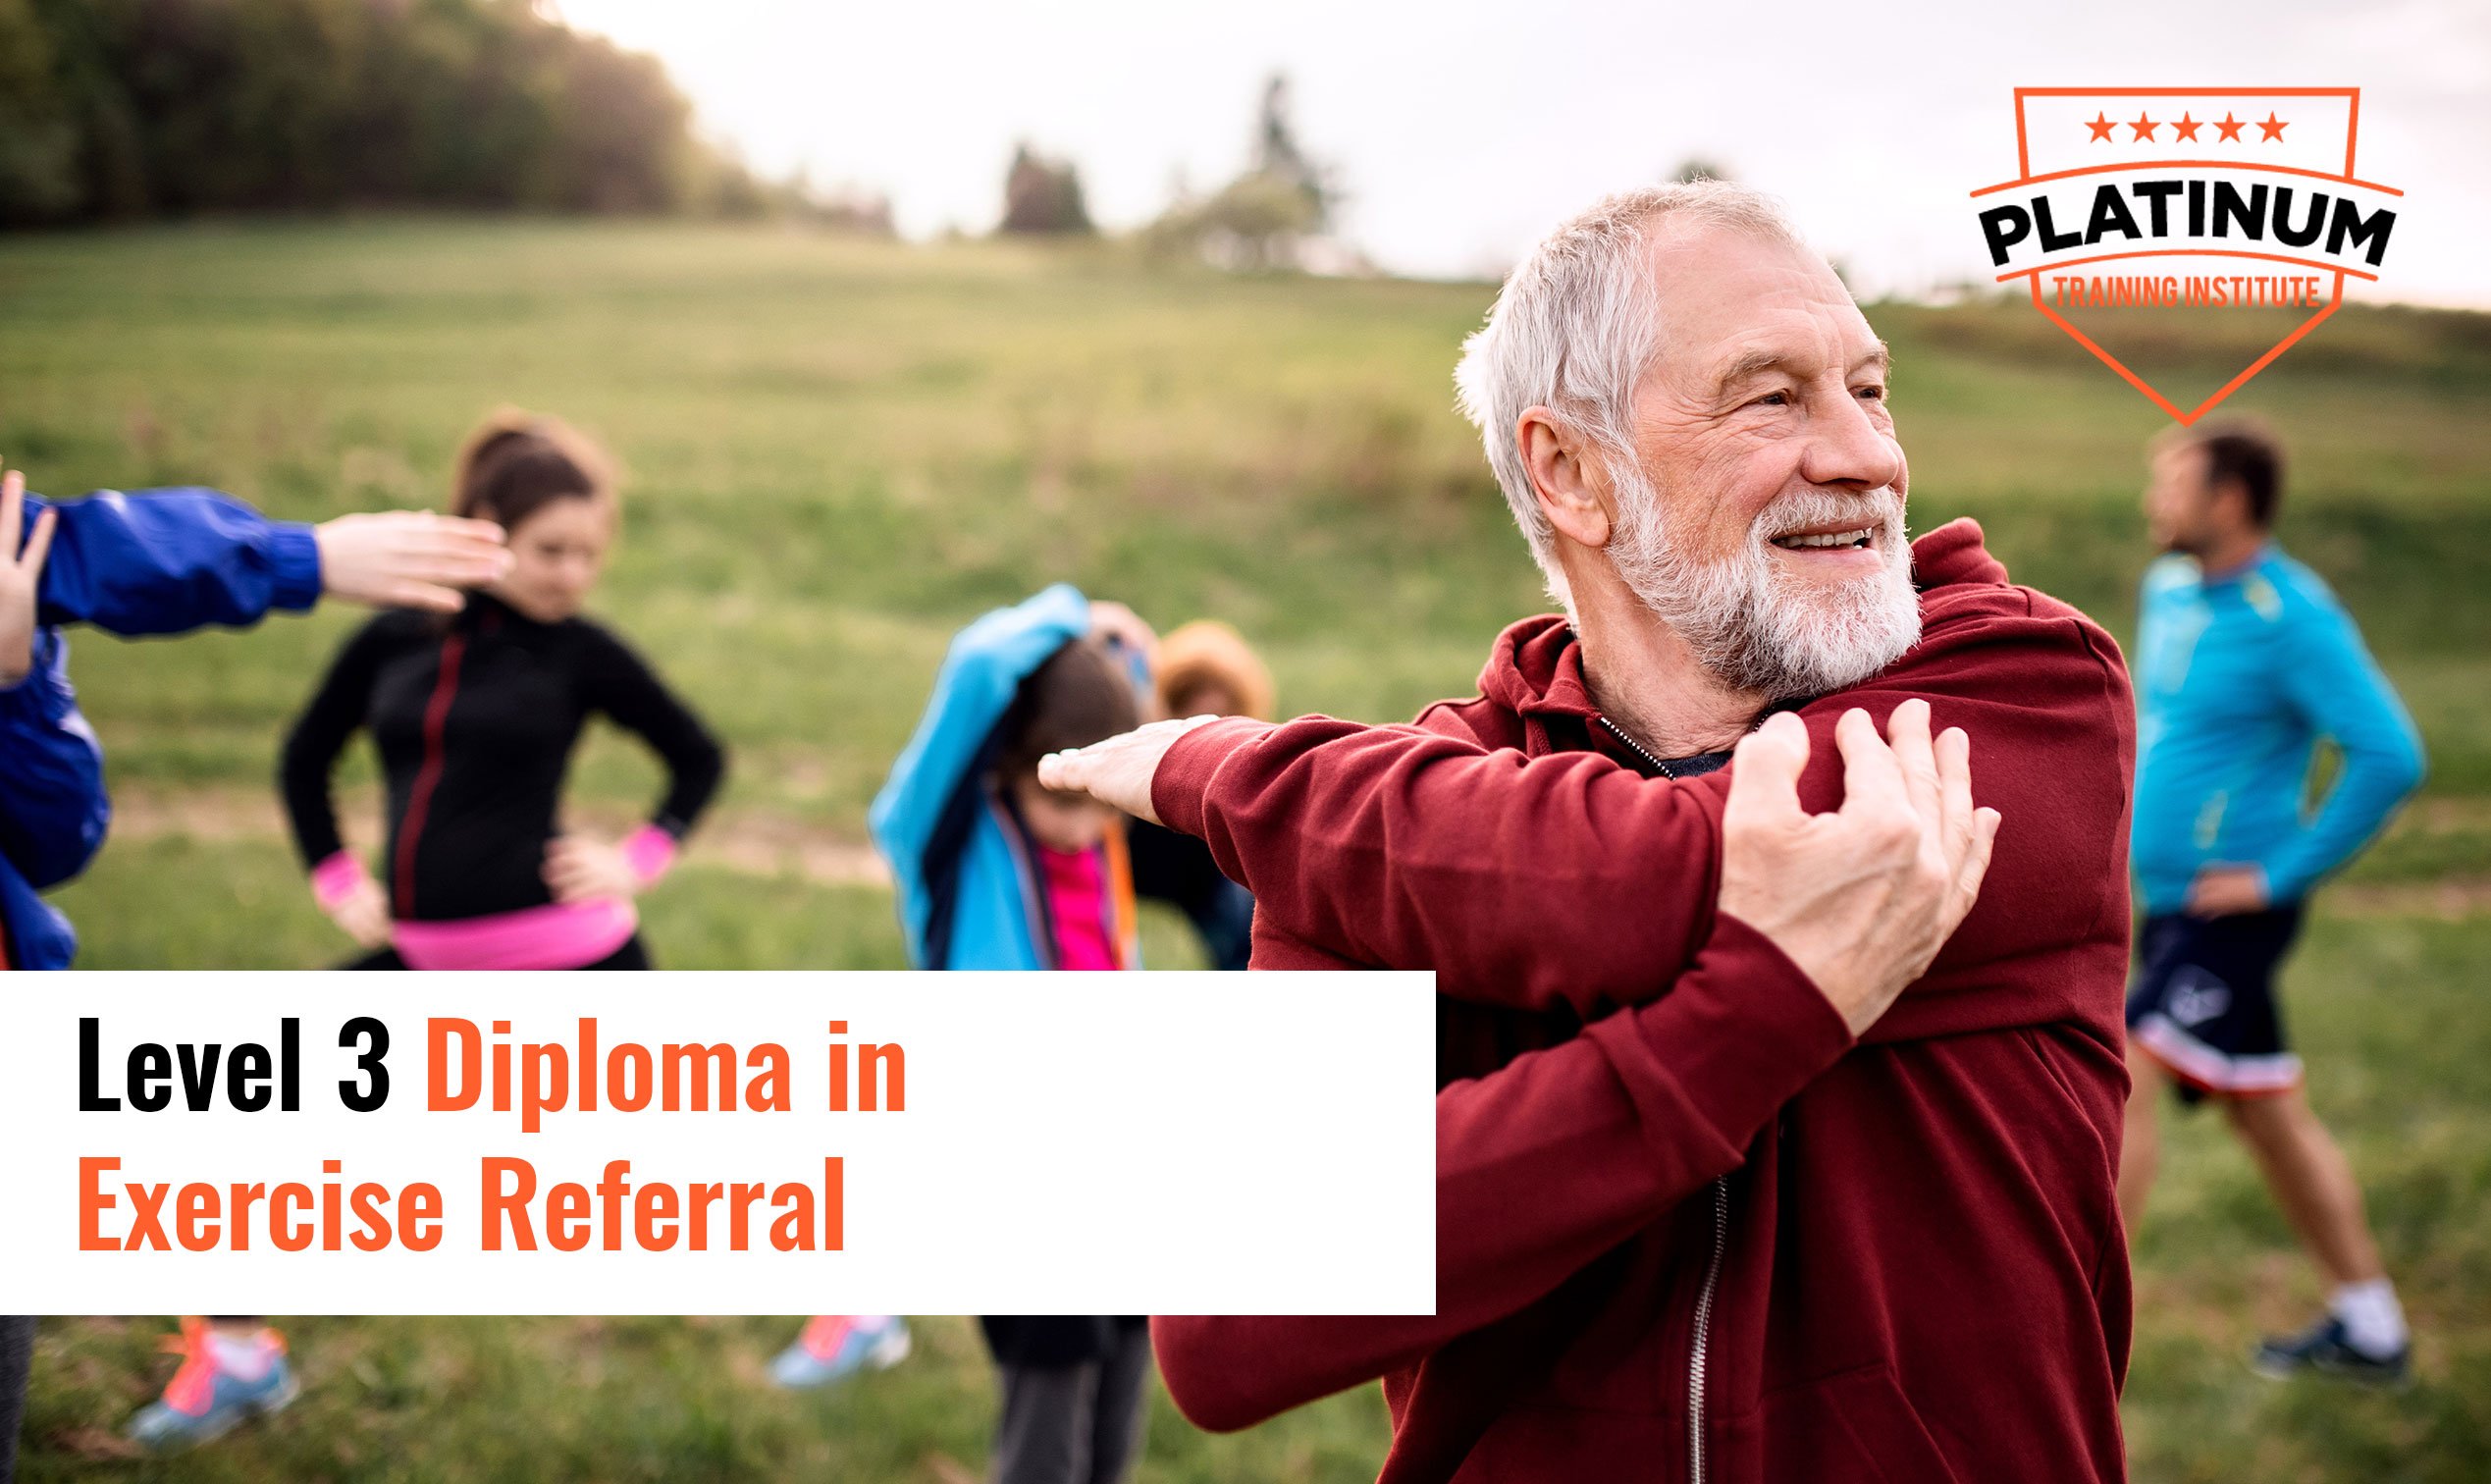 YMCA Level 3 Diploma in Exercise Referral